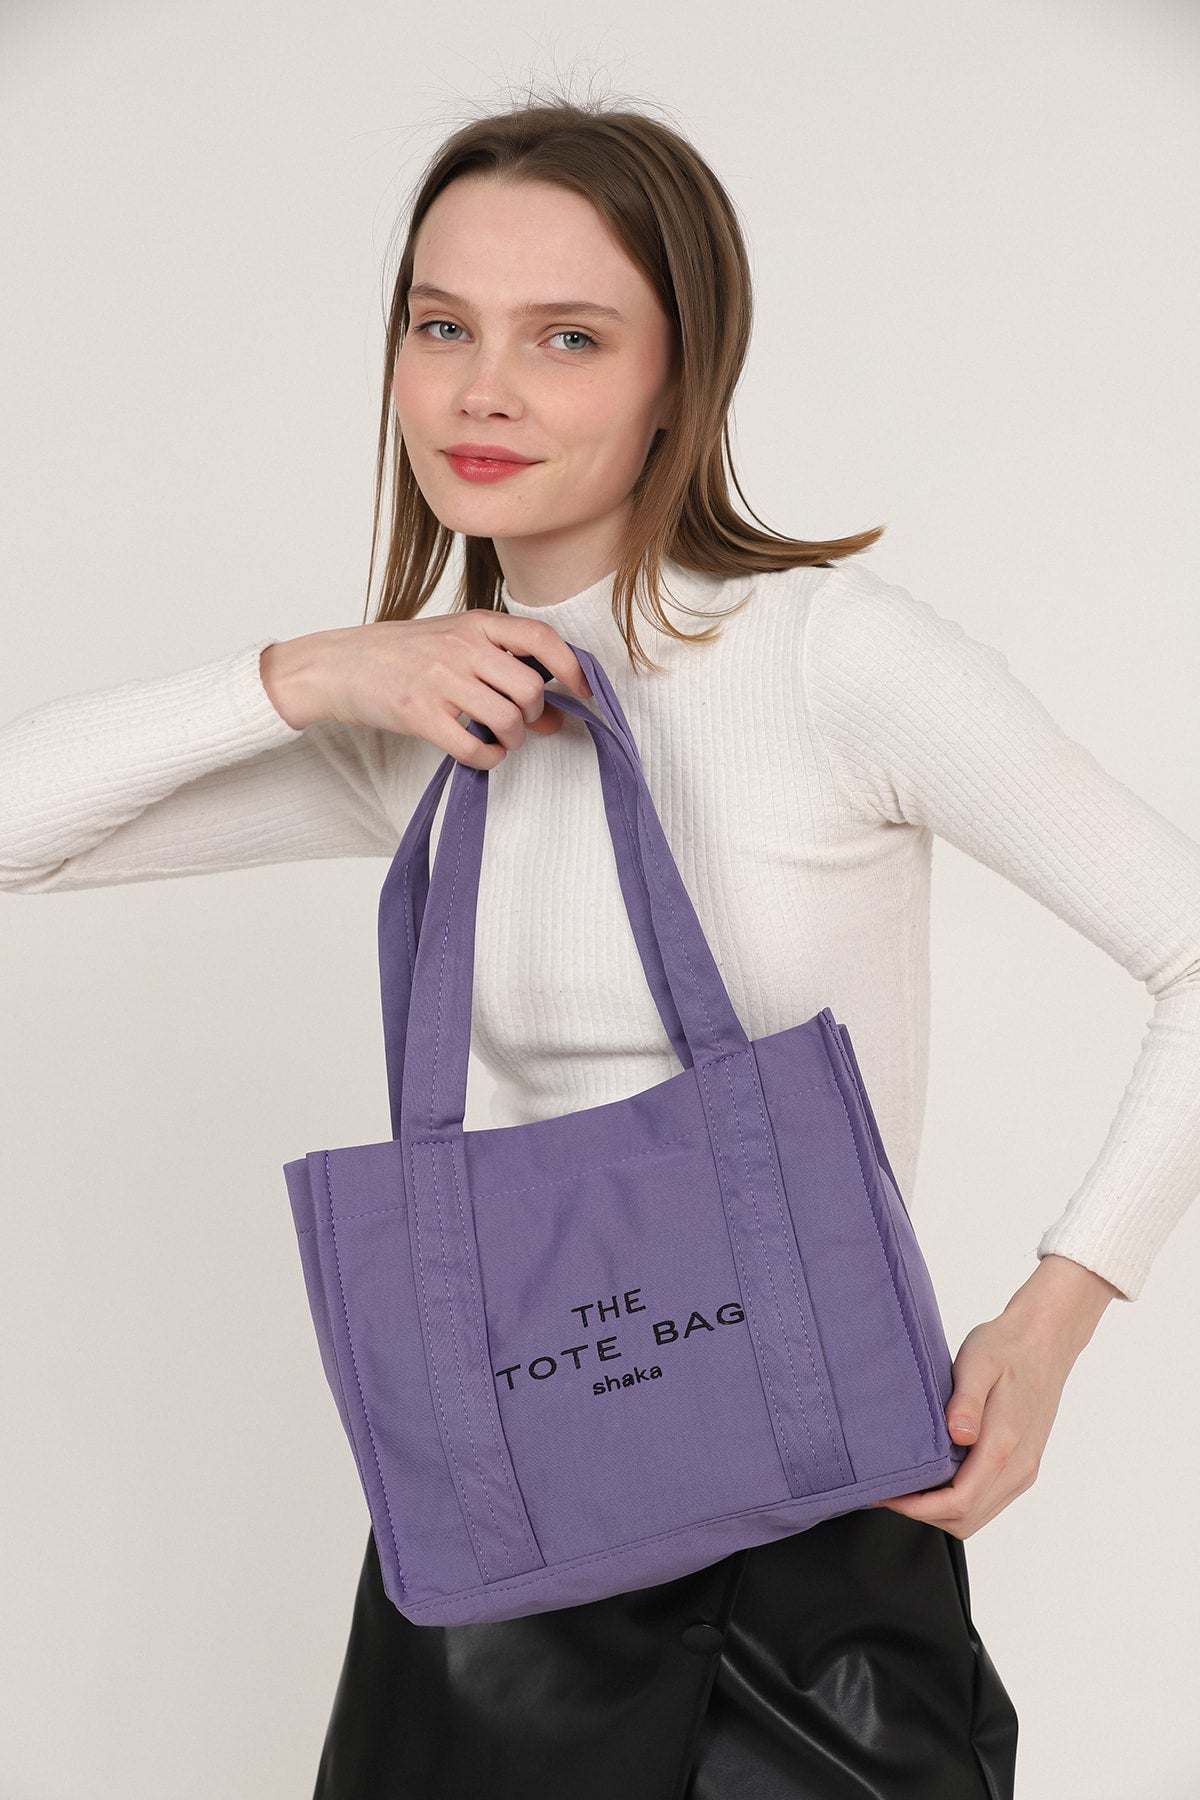 Lilac U45 Snap Closure The Tote Bag Embroidered Canvas Fabric Daily Women's Arm And Shoulder Bag 25x30